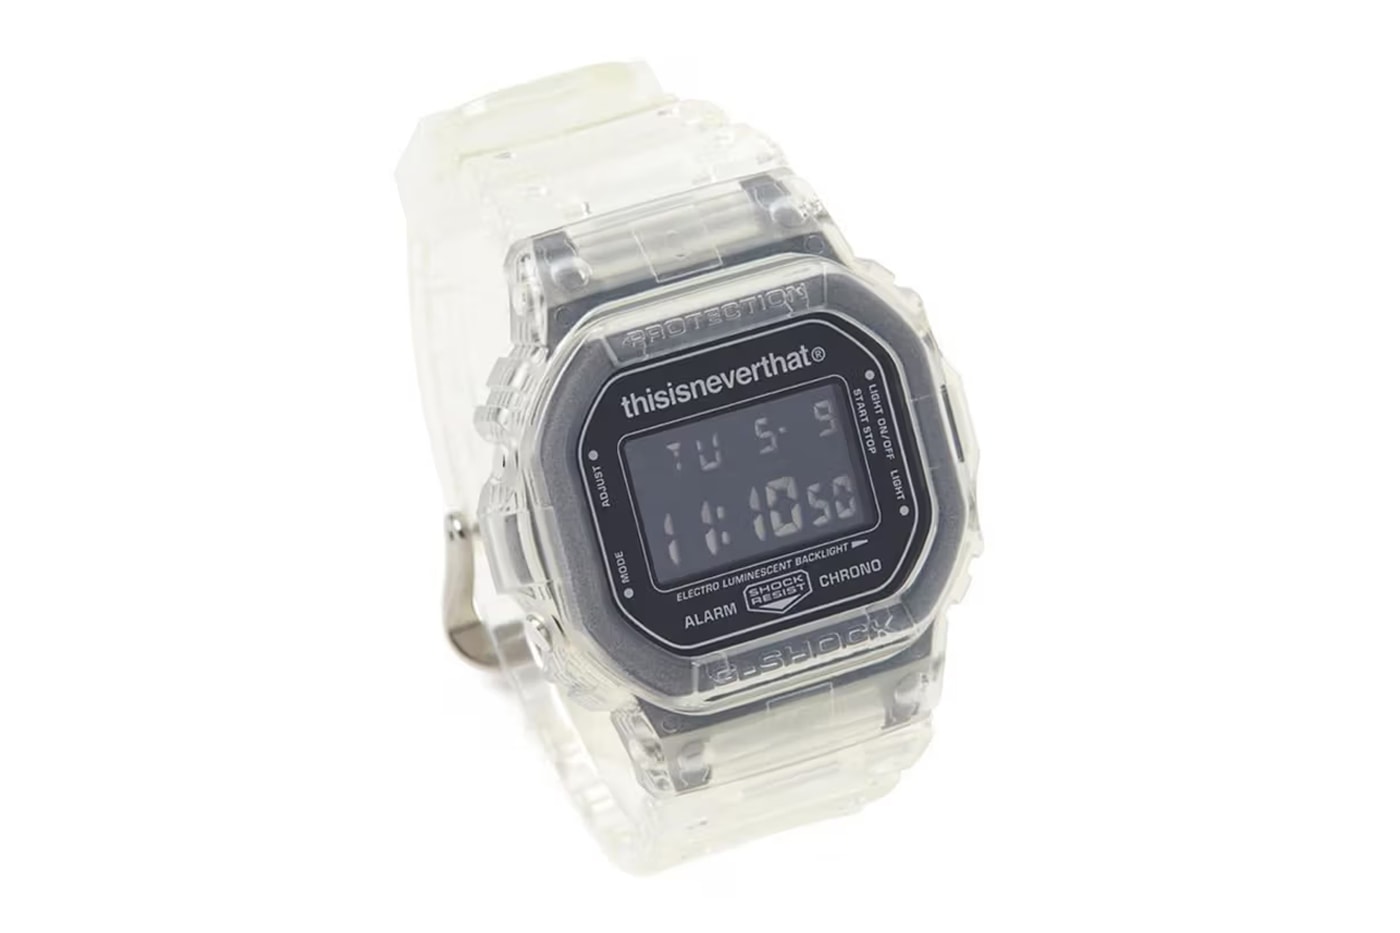 thisisneverthat g-shock watch tee release date info store list buying guide photos price 